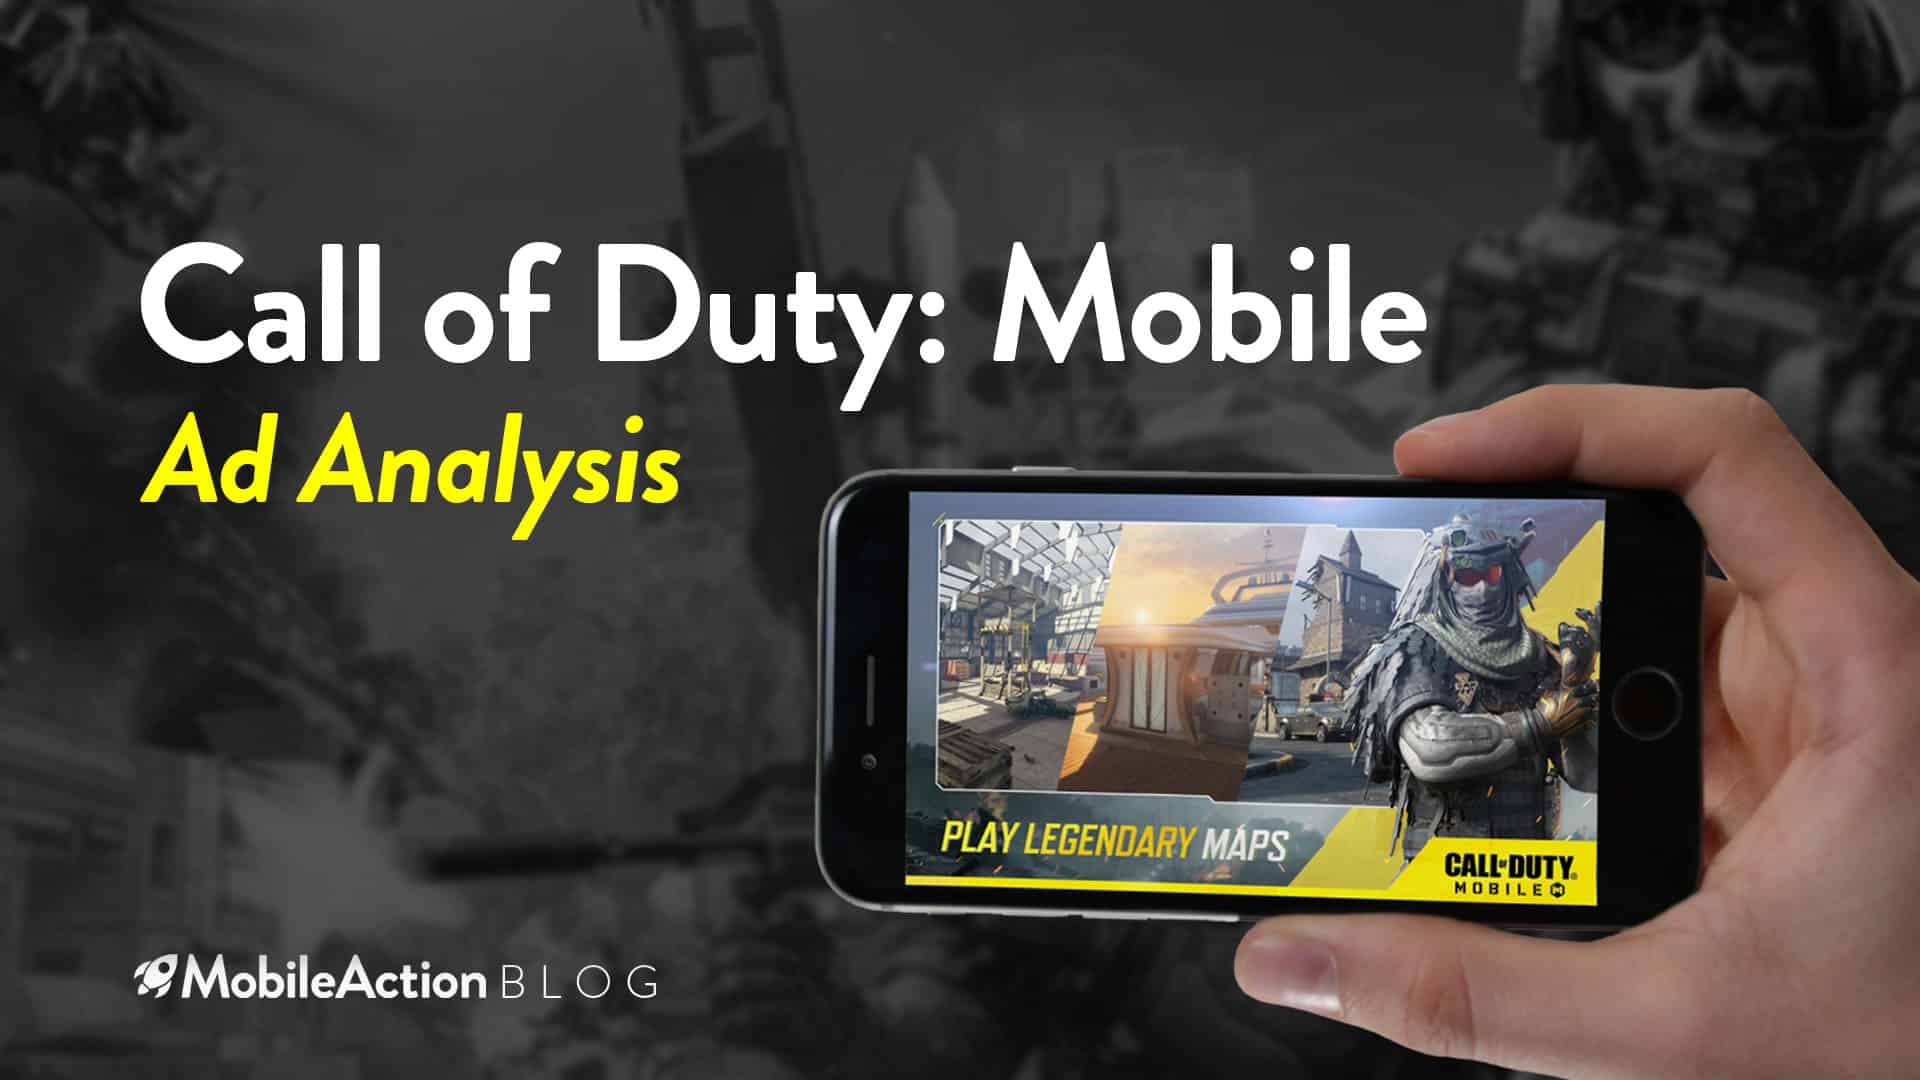 An Inside Look At the Call of Duty: Mobile’s Ad Strategy